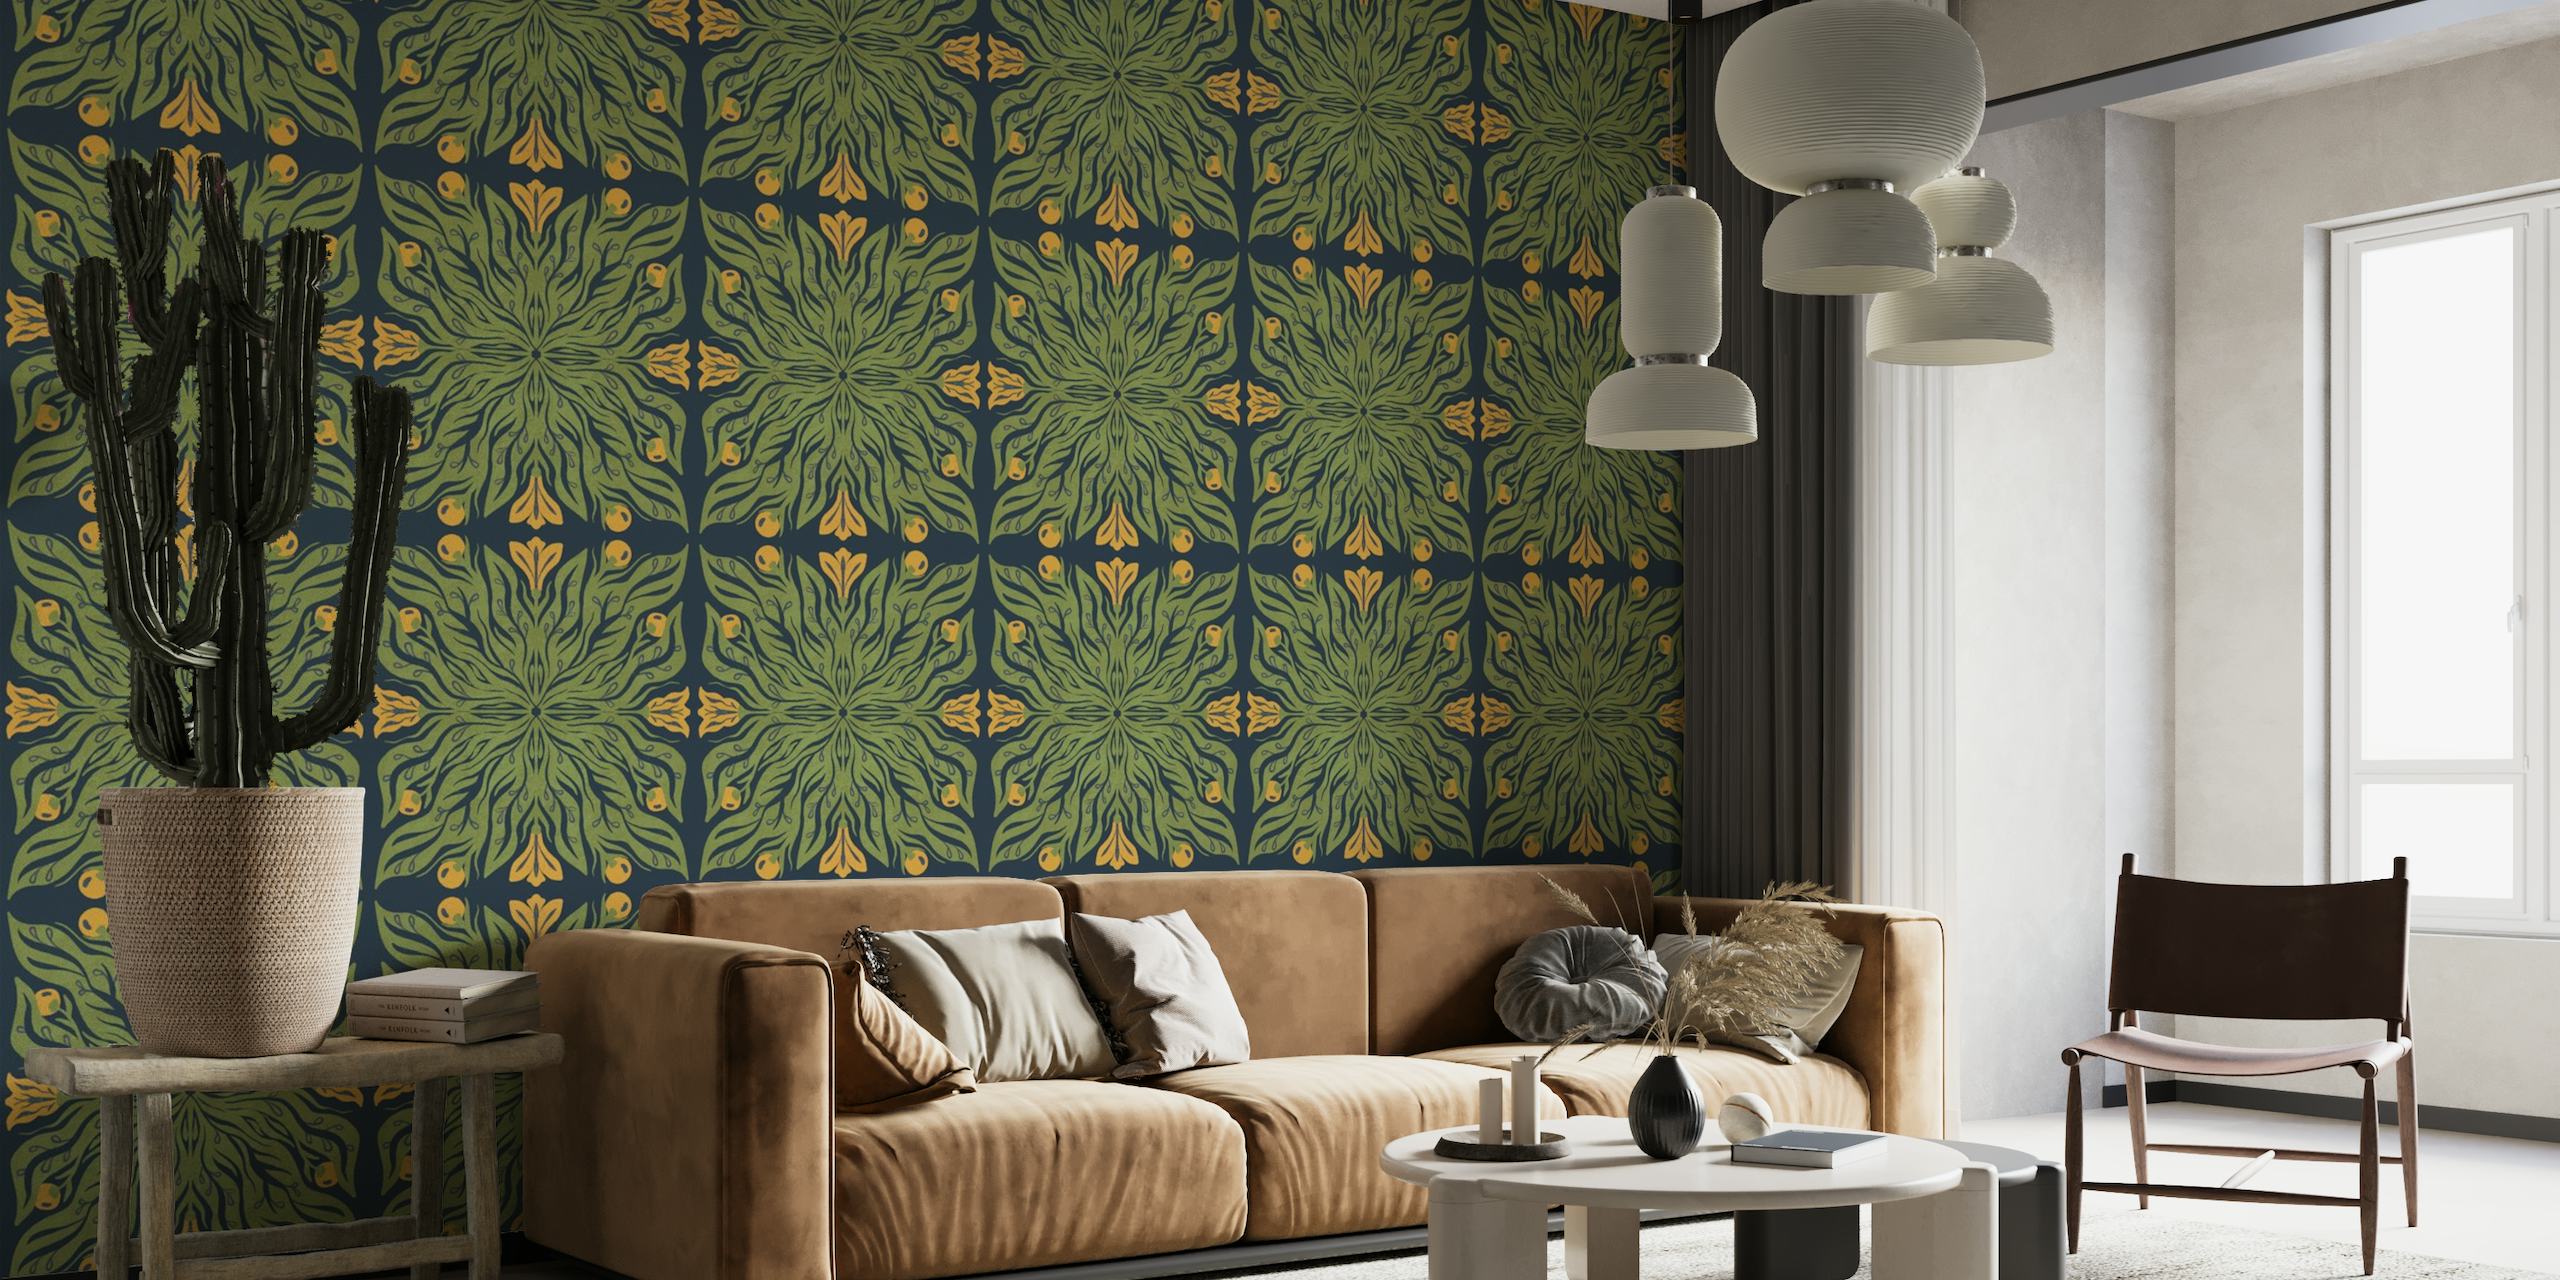 Intricate botanical foliage pattern wall mural with greens and yellows on a dark background